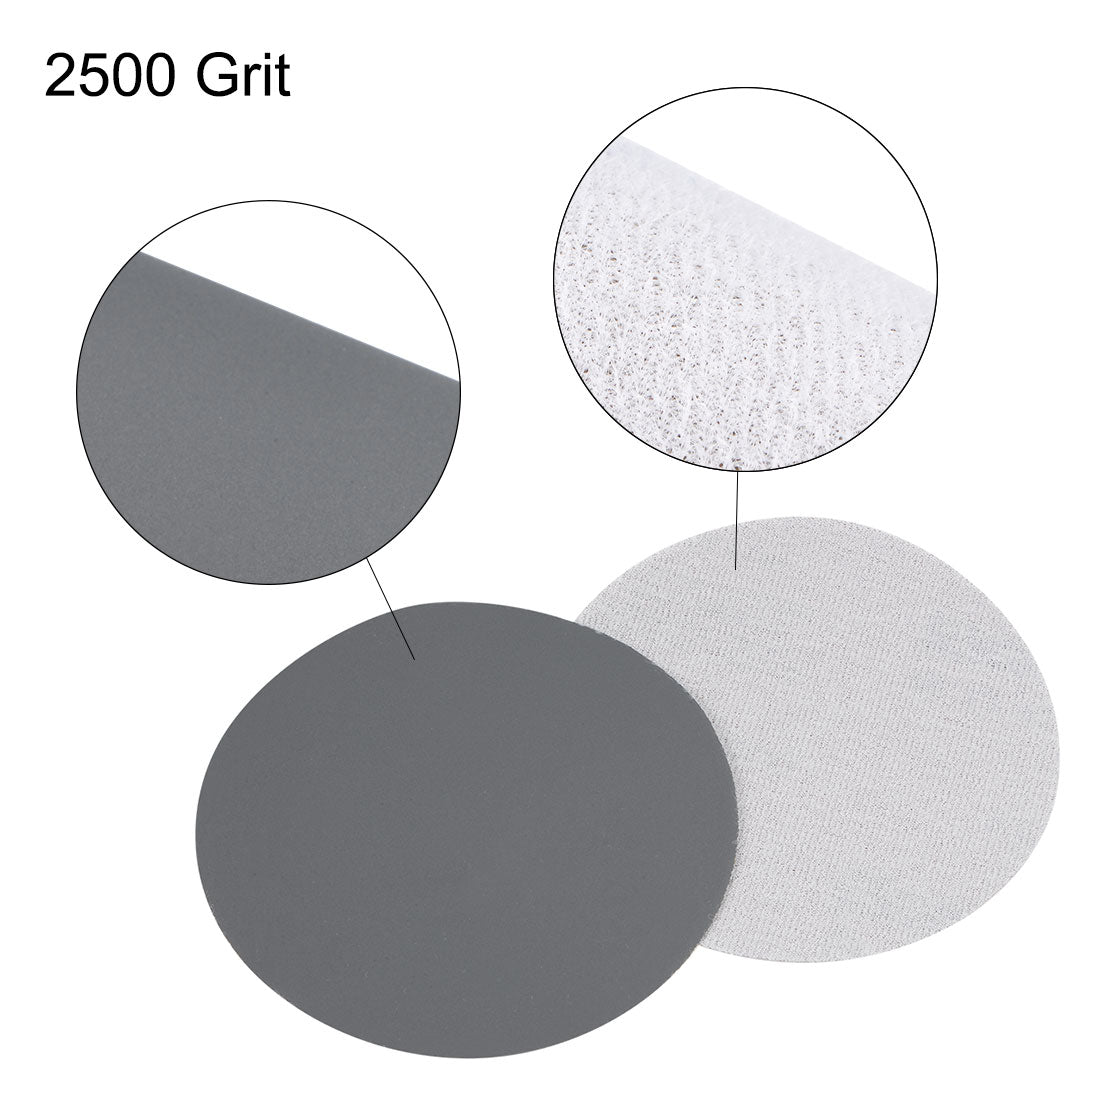 Uxcell Uxcell 5 inch Wet Dry Disc 2500 Grit Hook and Loop Sanding Disc Silicon Carbide 5pcs